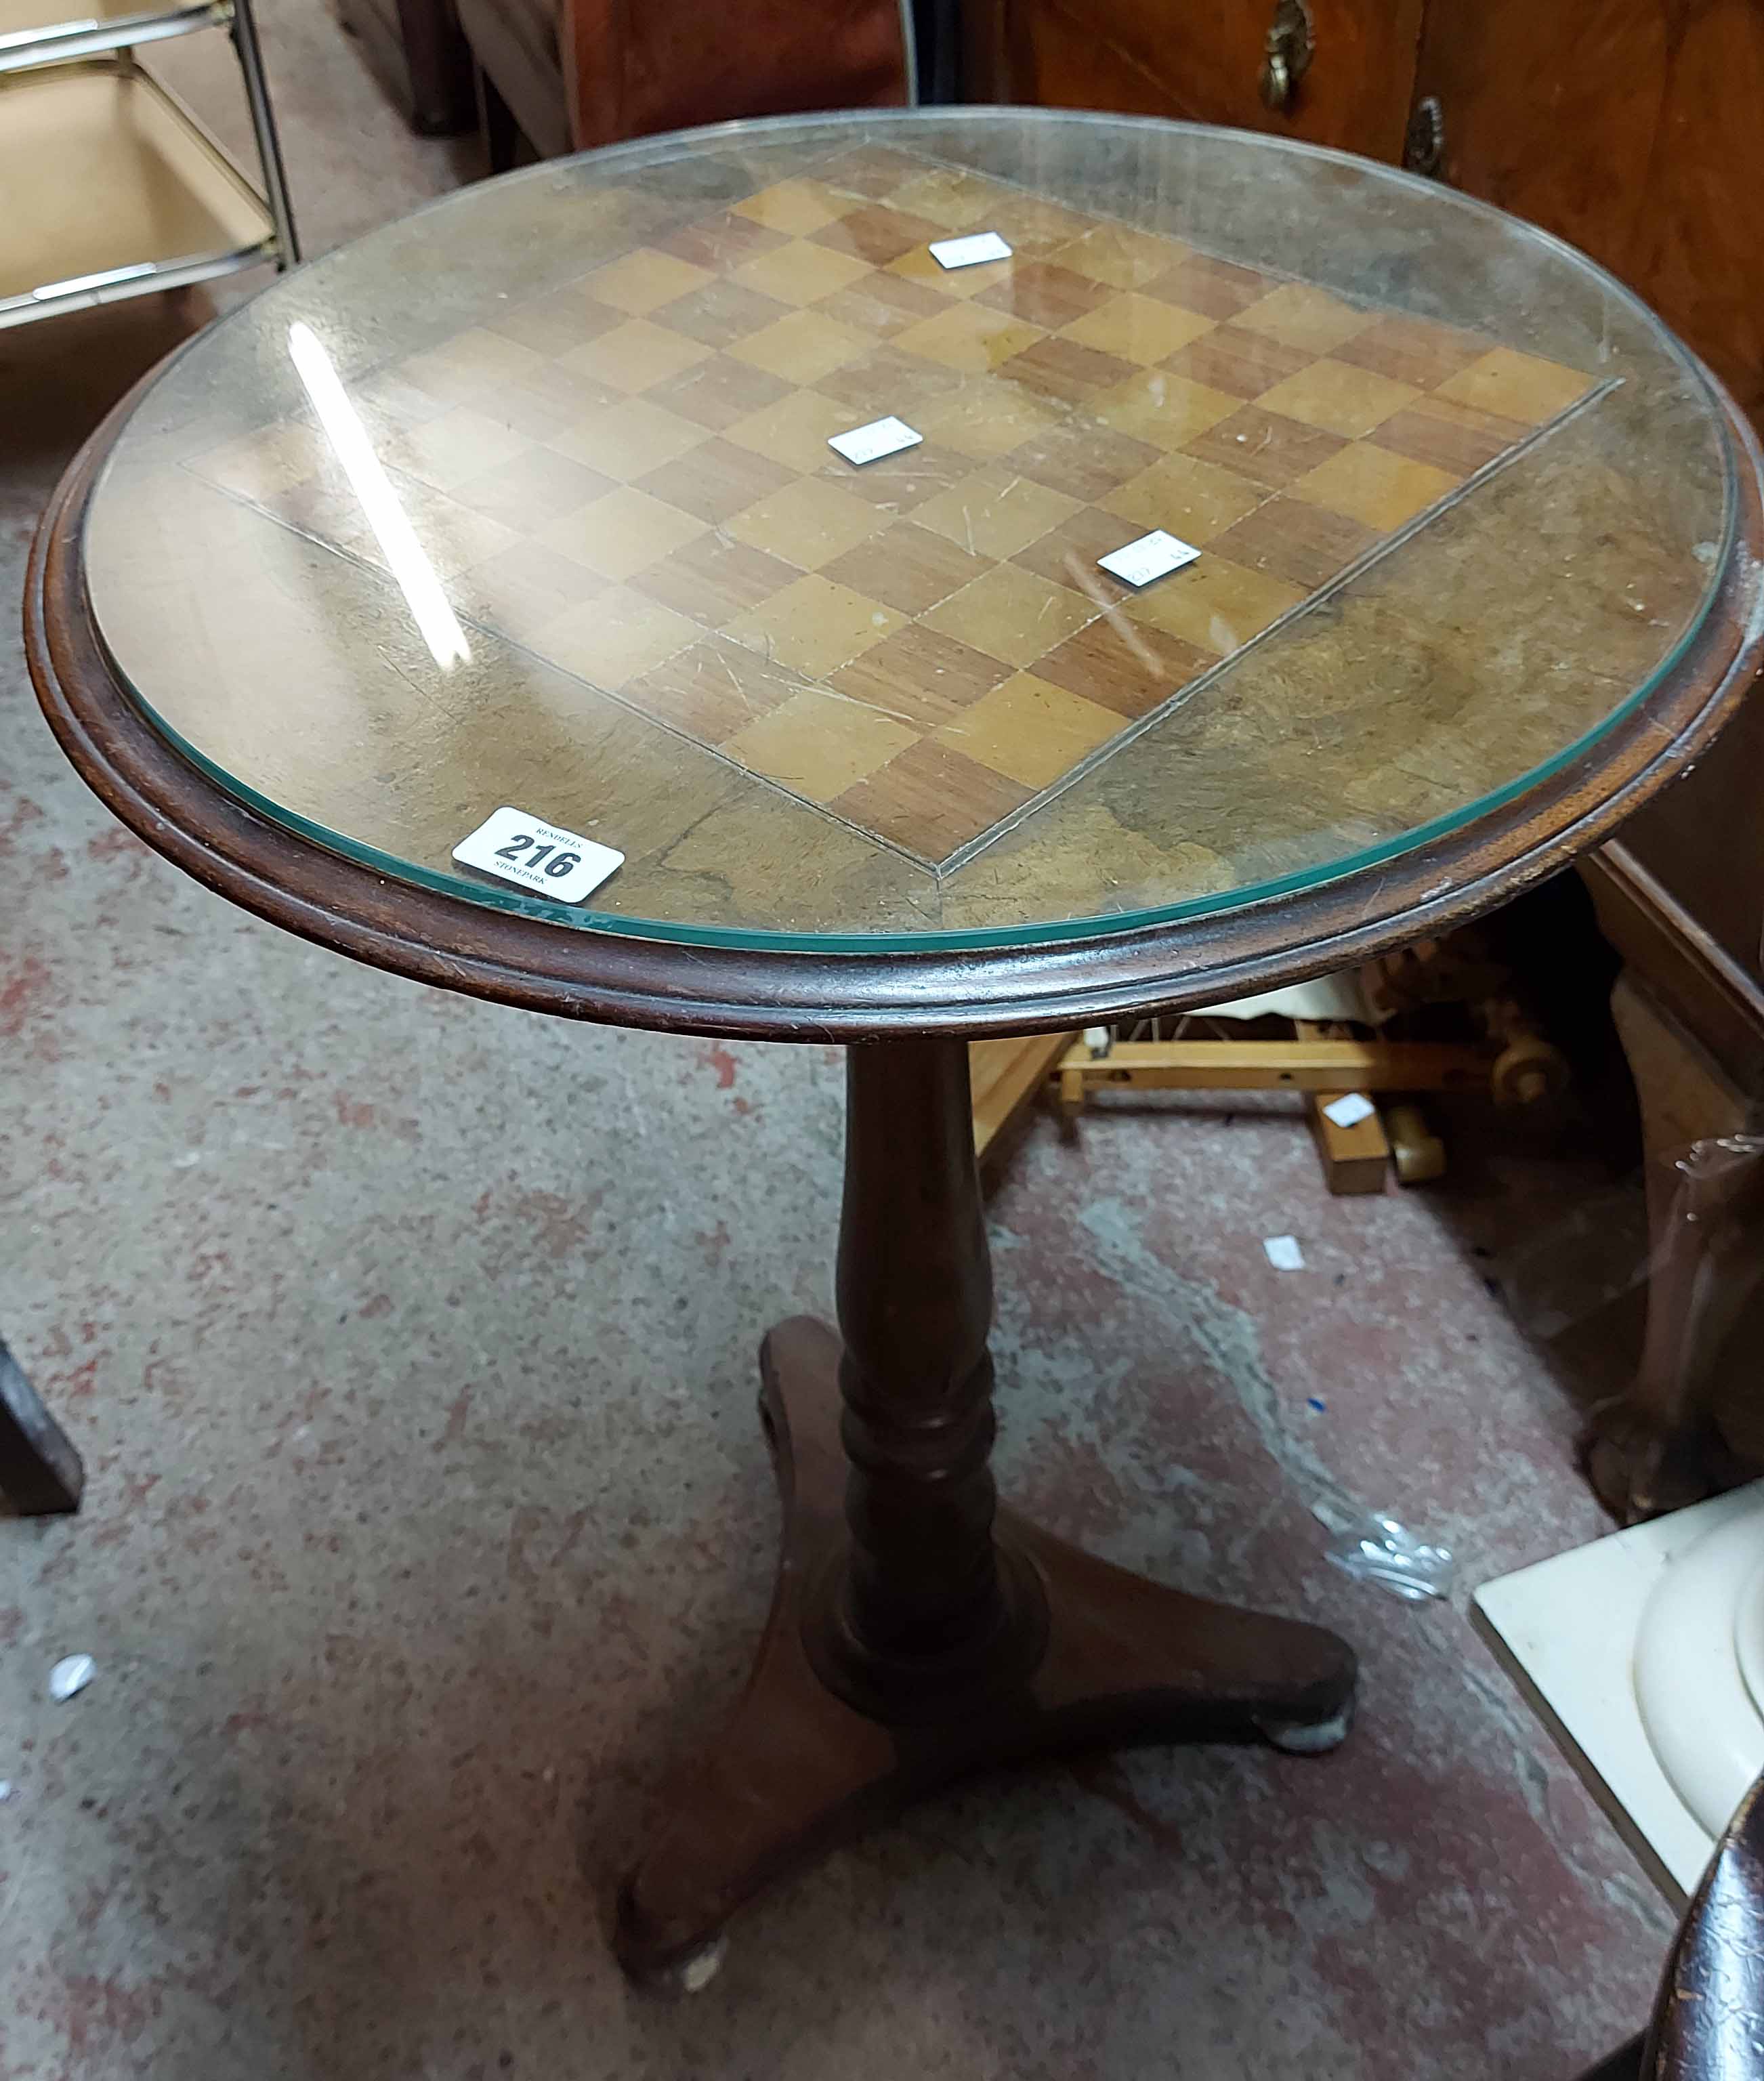 A 52cm diameter antique mahogany pedestal games table with inlaid chessboard top, set on turned